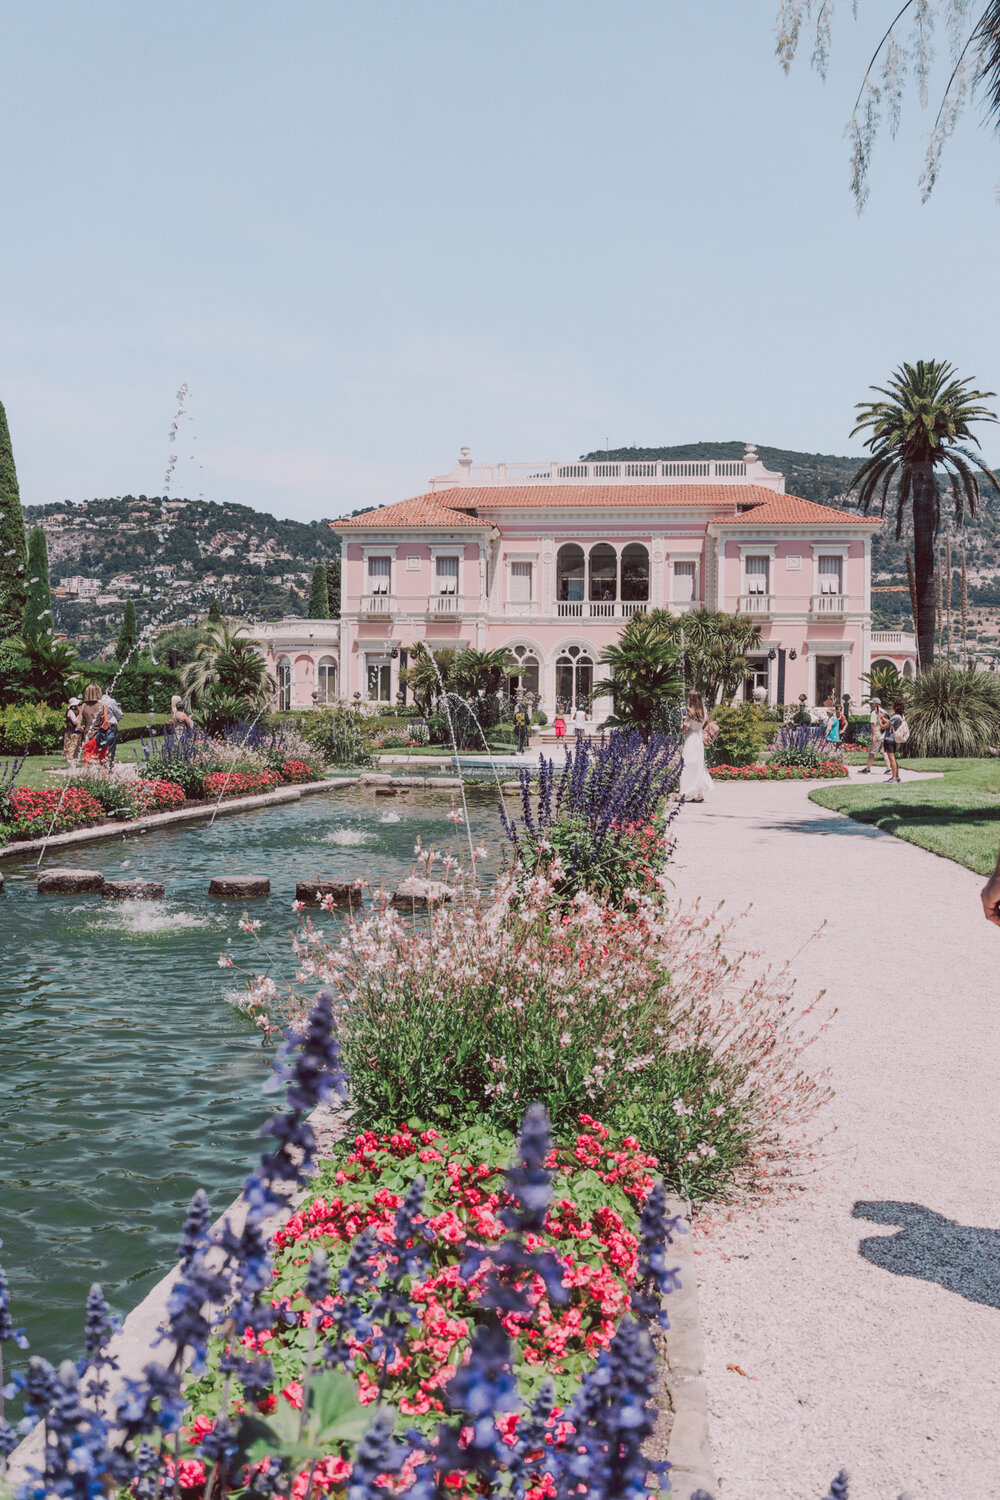 Villa Ephrussi de Rothschild | South of France | French Riviera | Things to see in French Riviera | Day Trip from Nice | Day Trip from Monaco | French Villa 